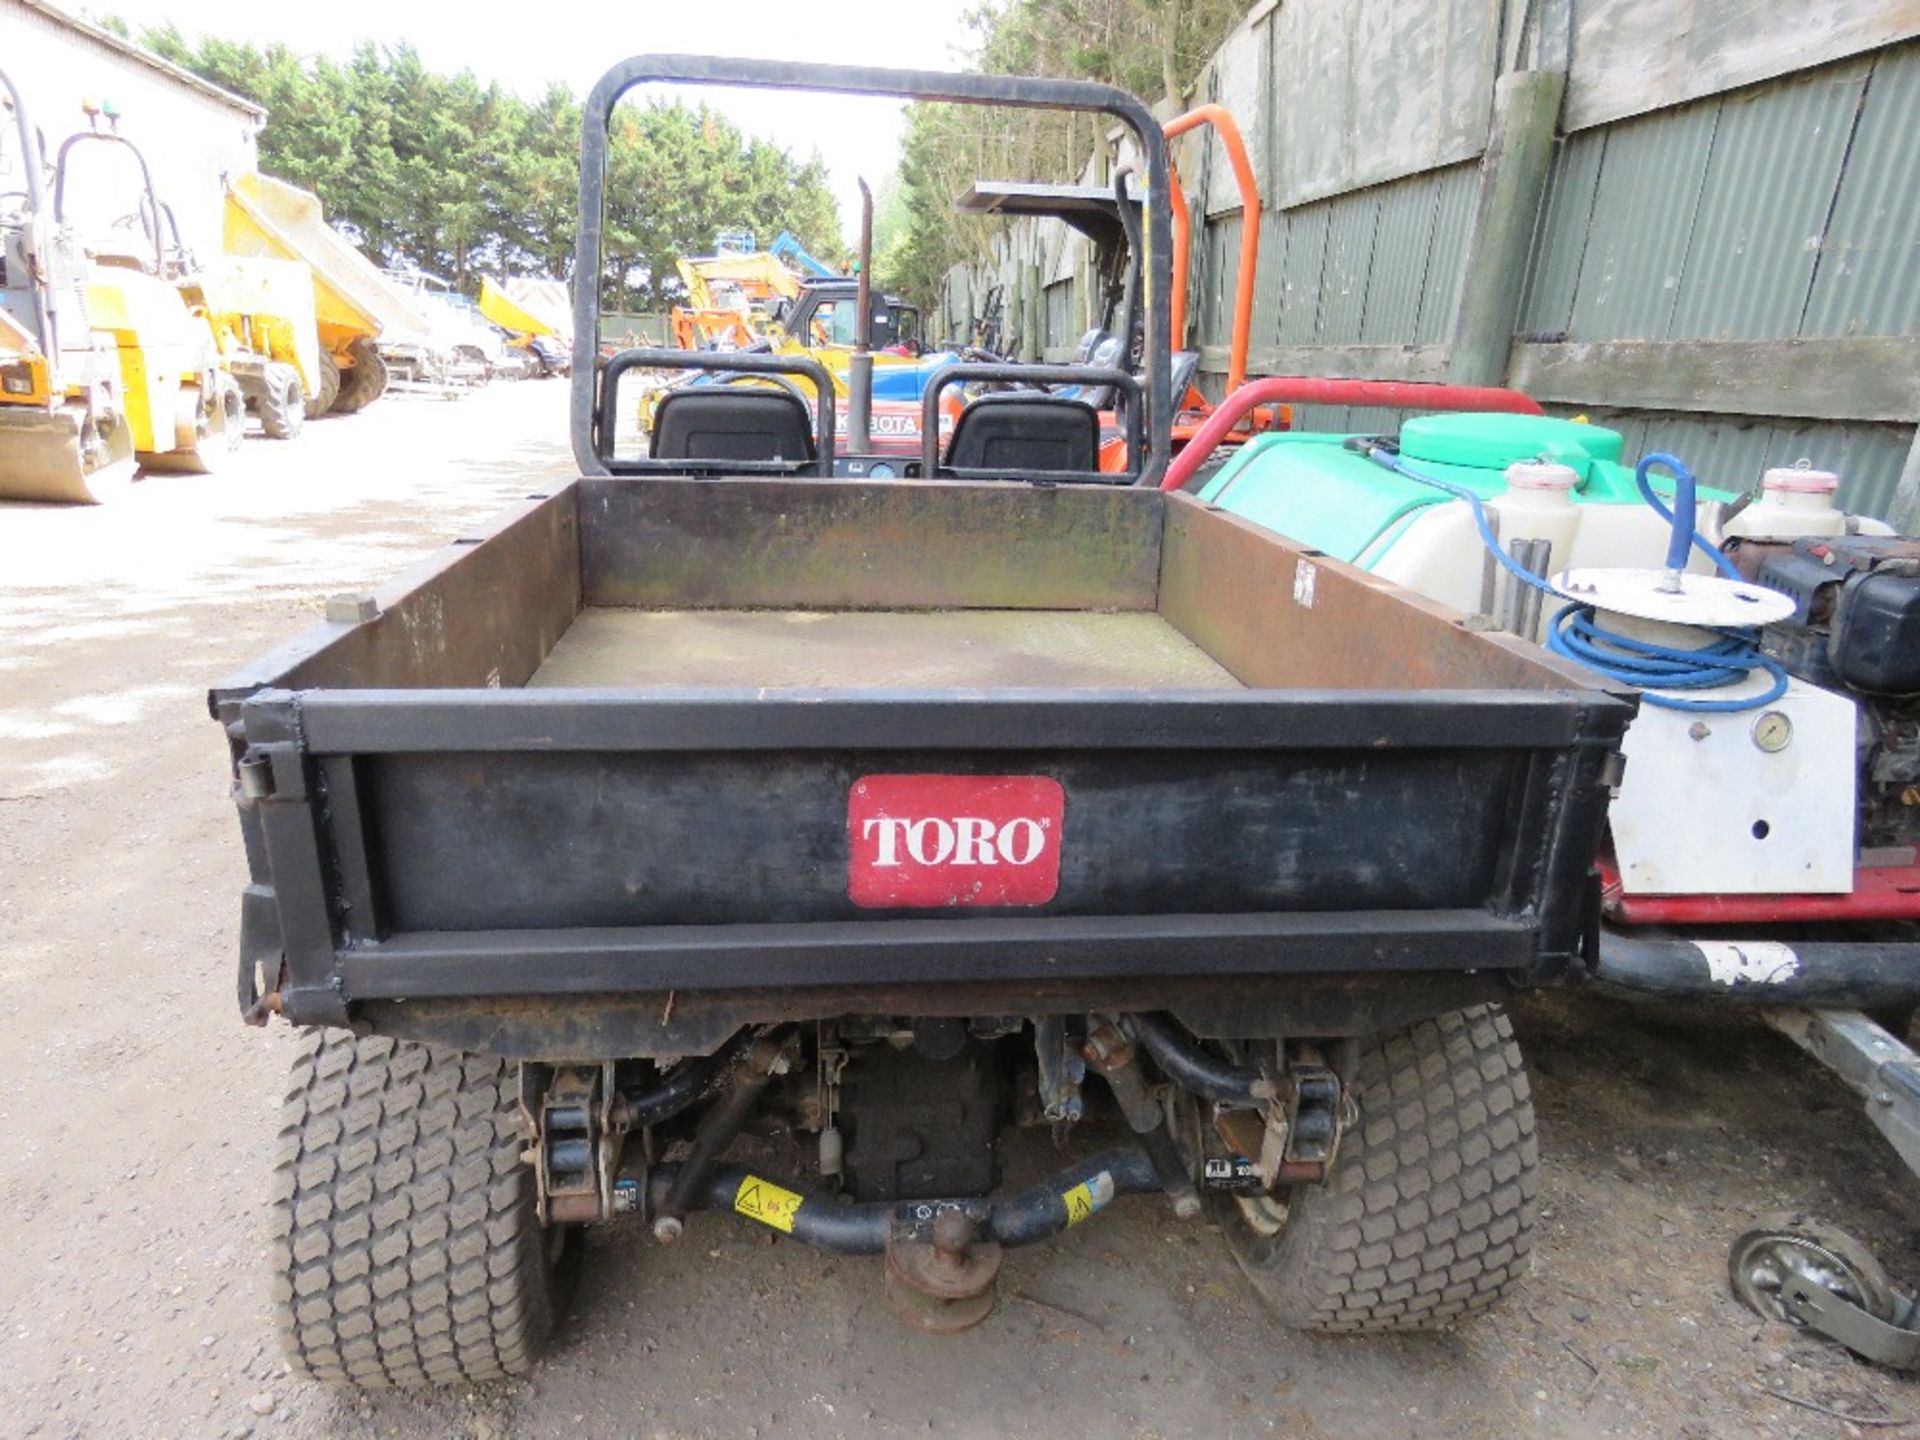 TORO 4300D 4WD UTILITY TRUCK WITH HYDRAULIC TIPPING. 1705 REC HOURS. WHEN TESTED WAS SEEN TO RUN, DR - Image 7 of 7